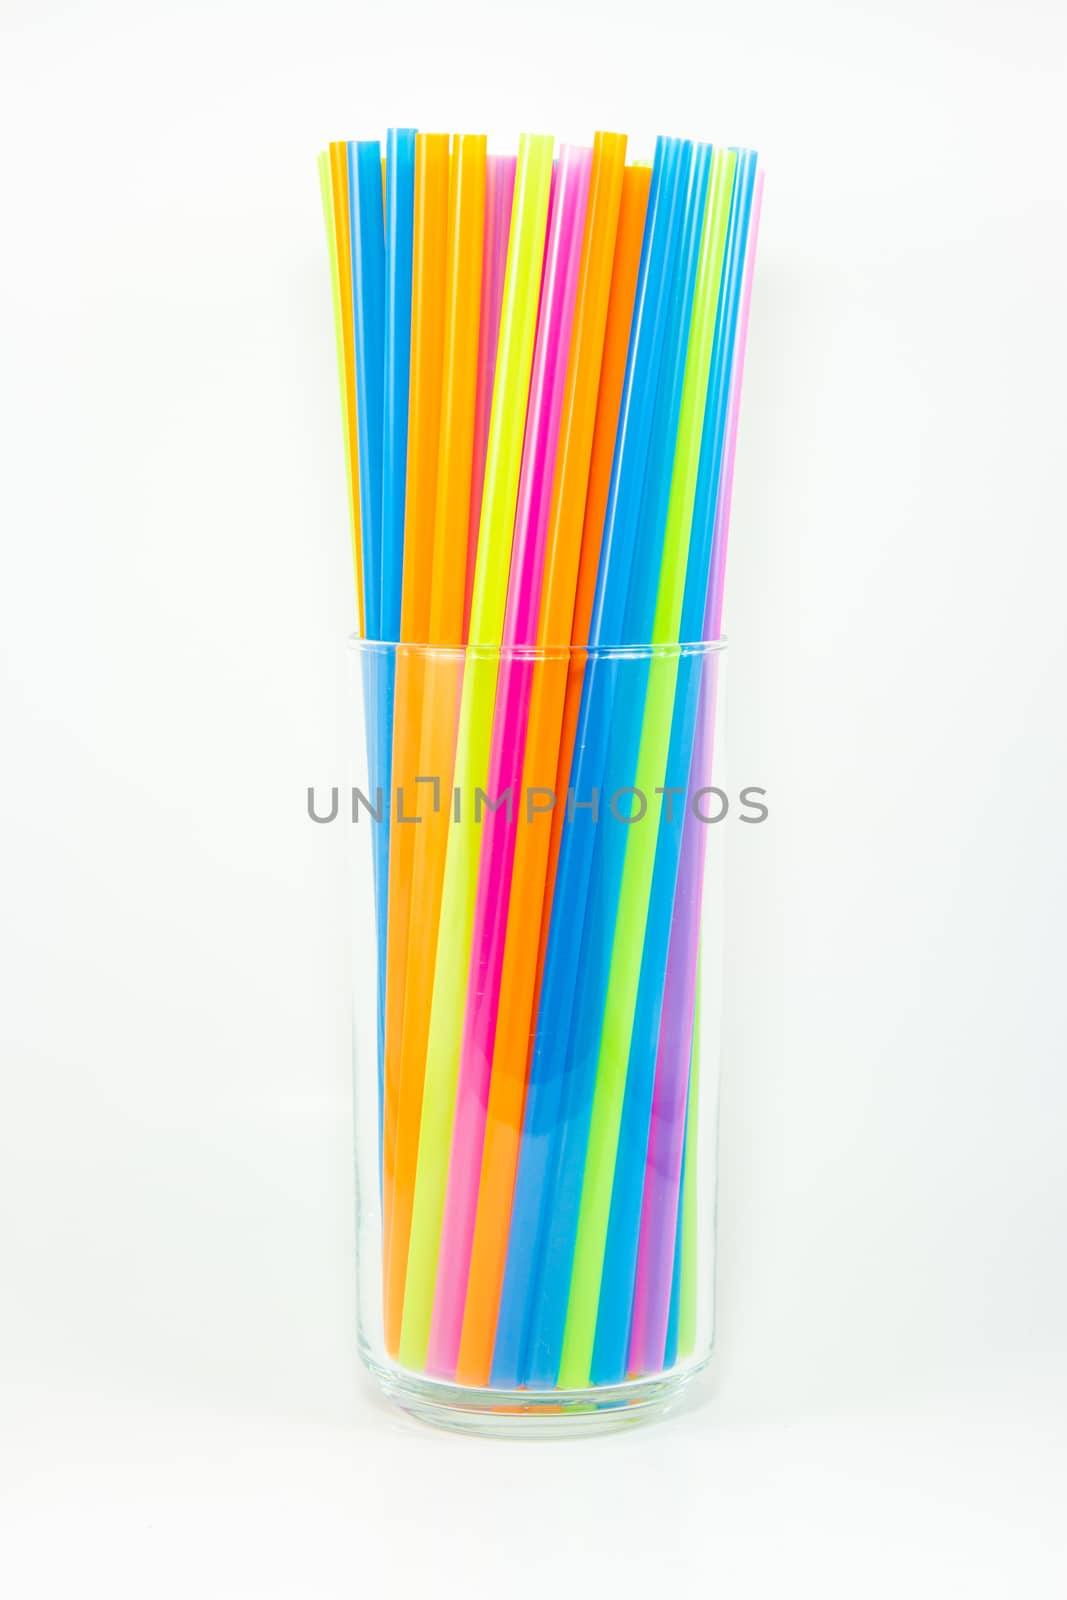 Colorful drinking straws in glass isolated on white background by kasinv